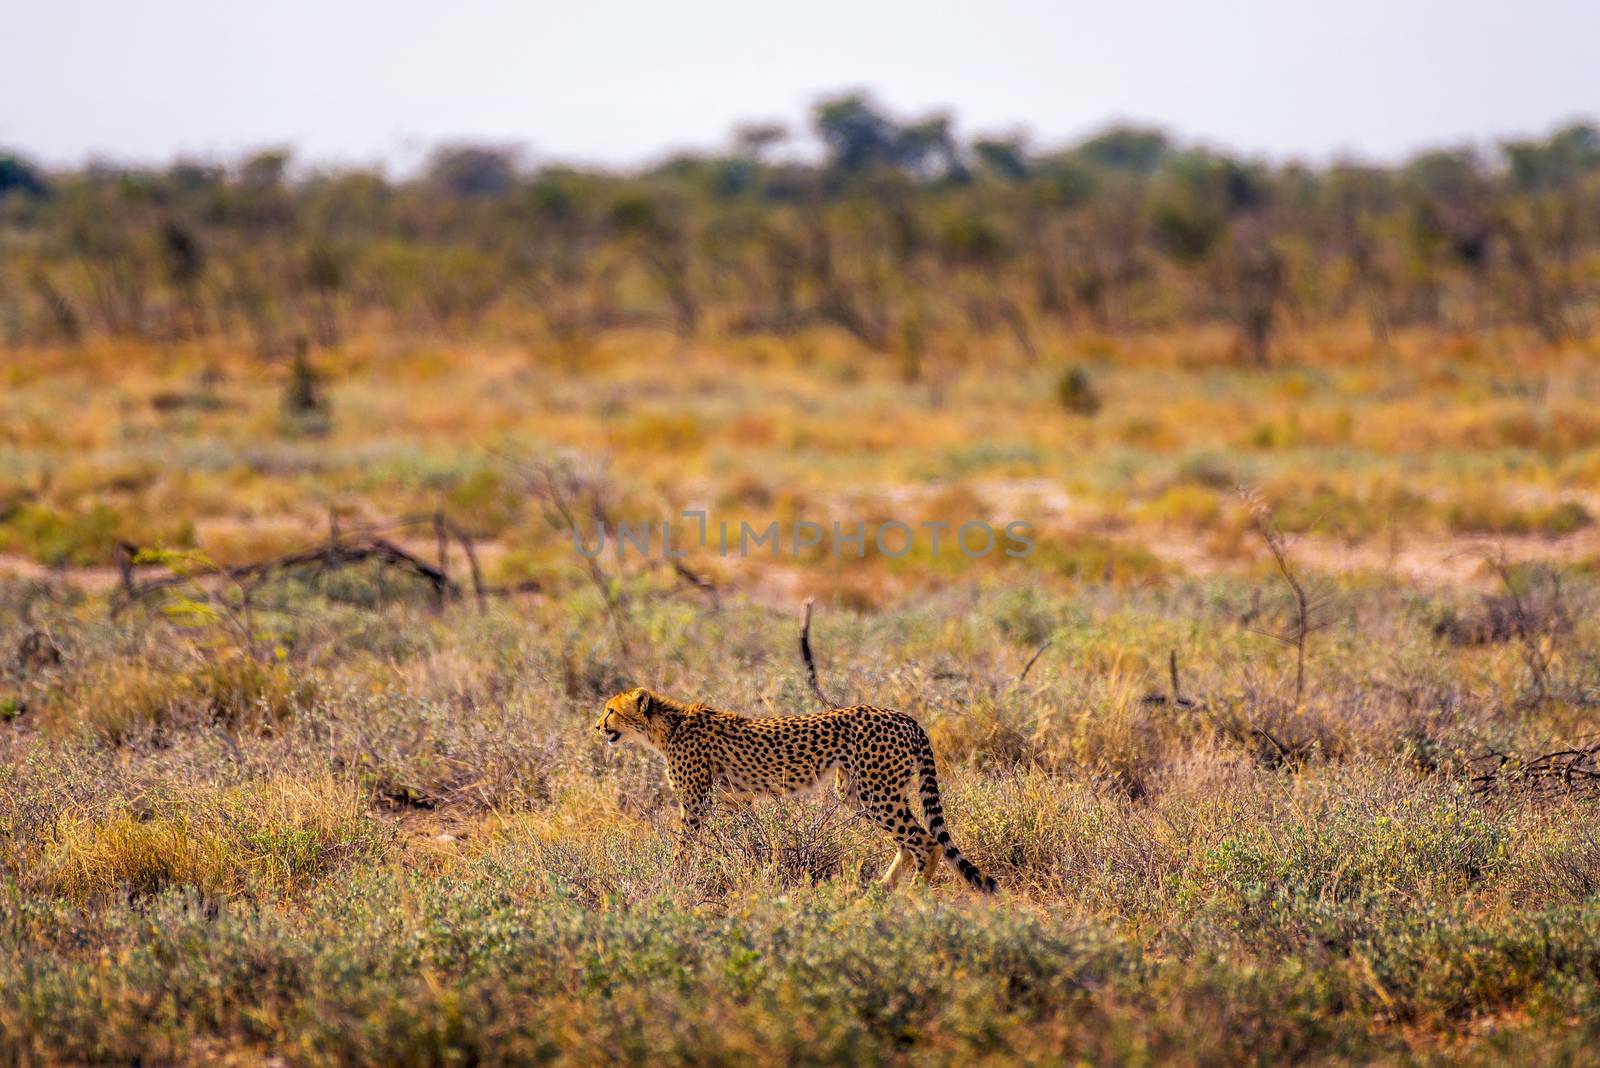 Cheetah lurking for prey at sunset in the Etosha National Park, the largest wildlife reserve in Namibia